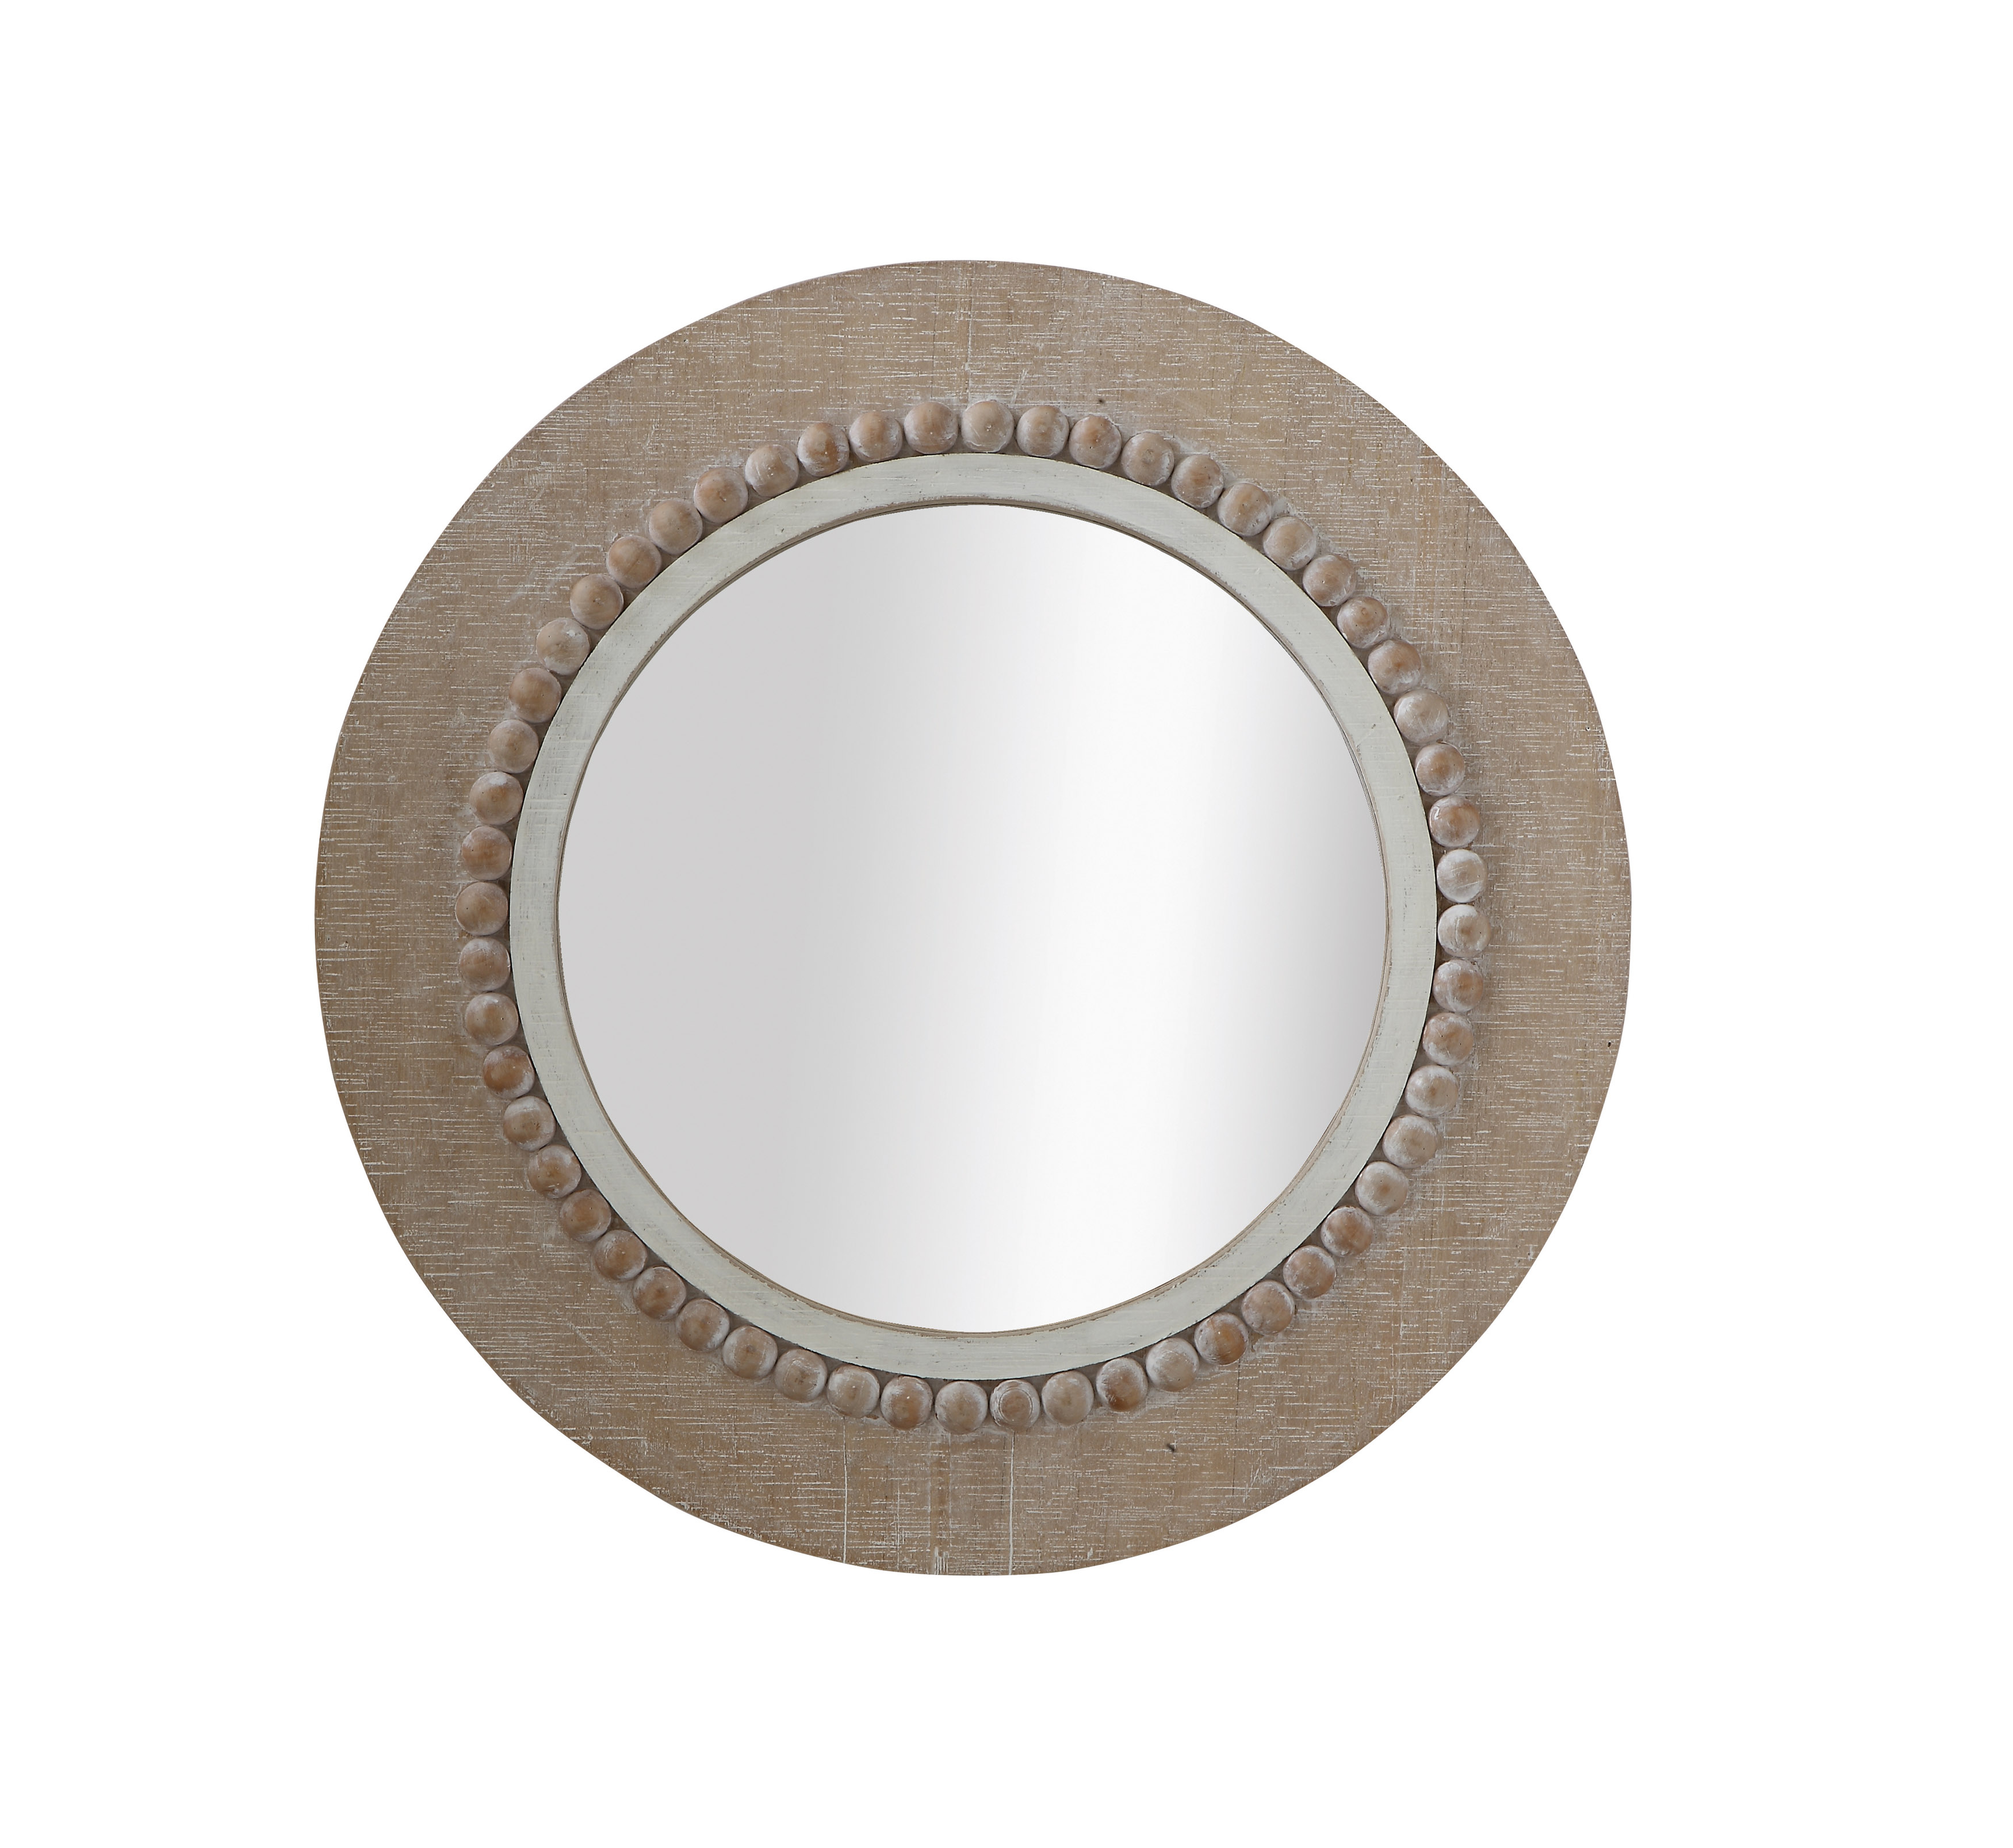 Round Decorative Wood Wall Mirror - Nomad Home